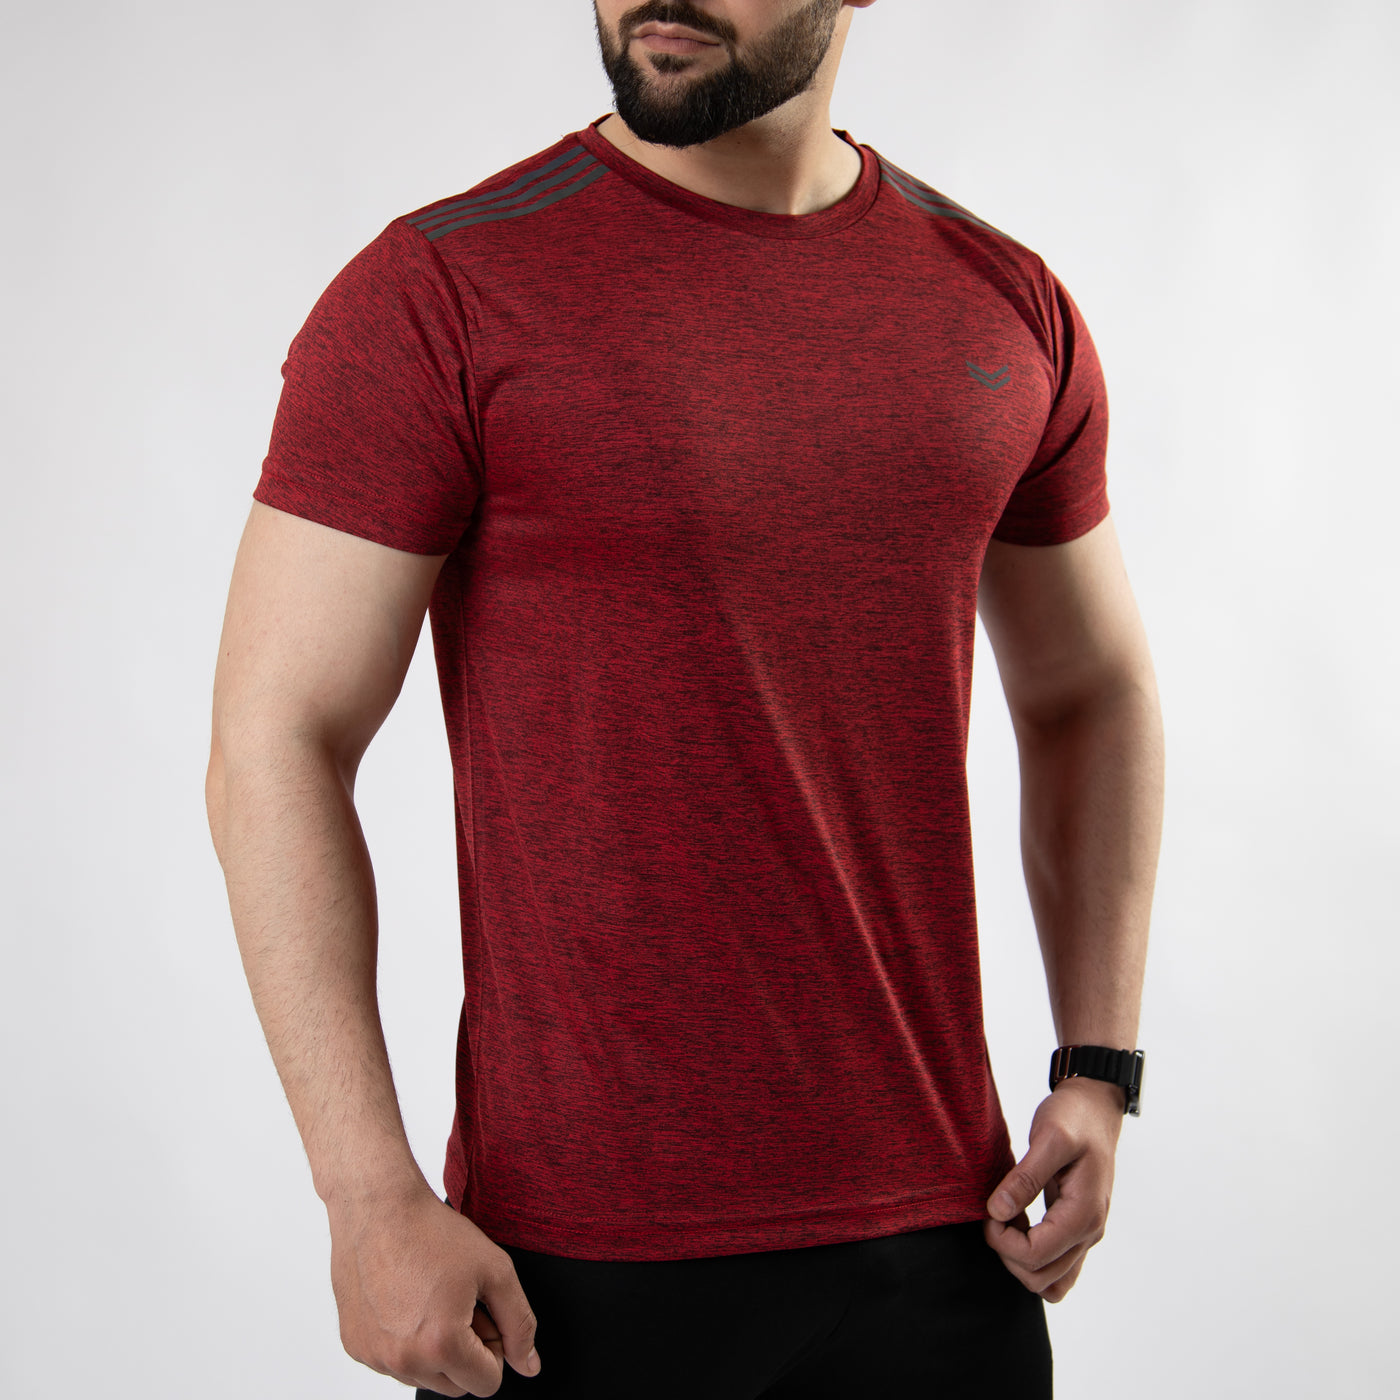 Maroon Melange Quick Dry T-Shirt with Carbon Reflective Details